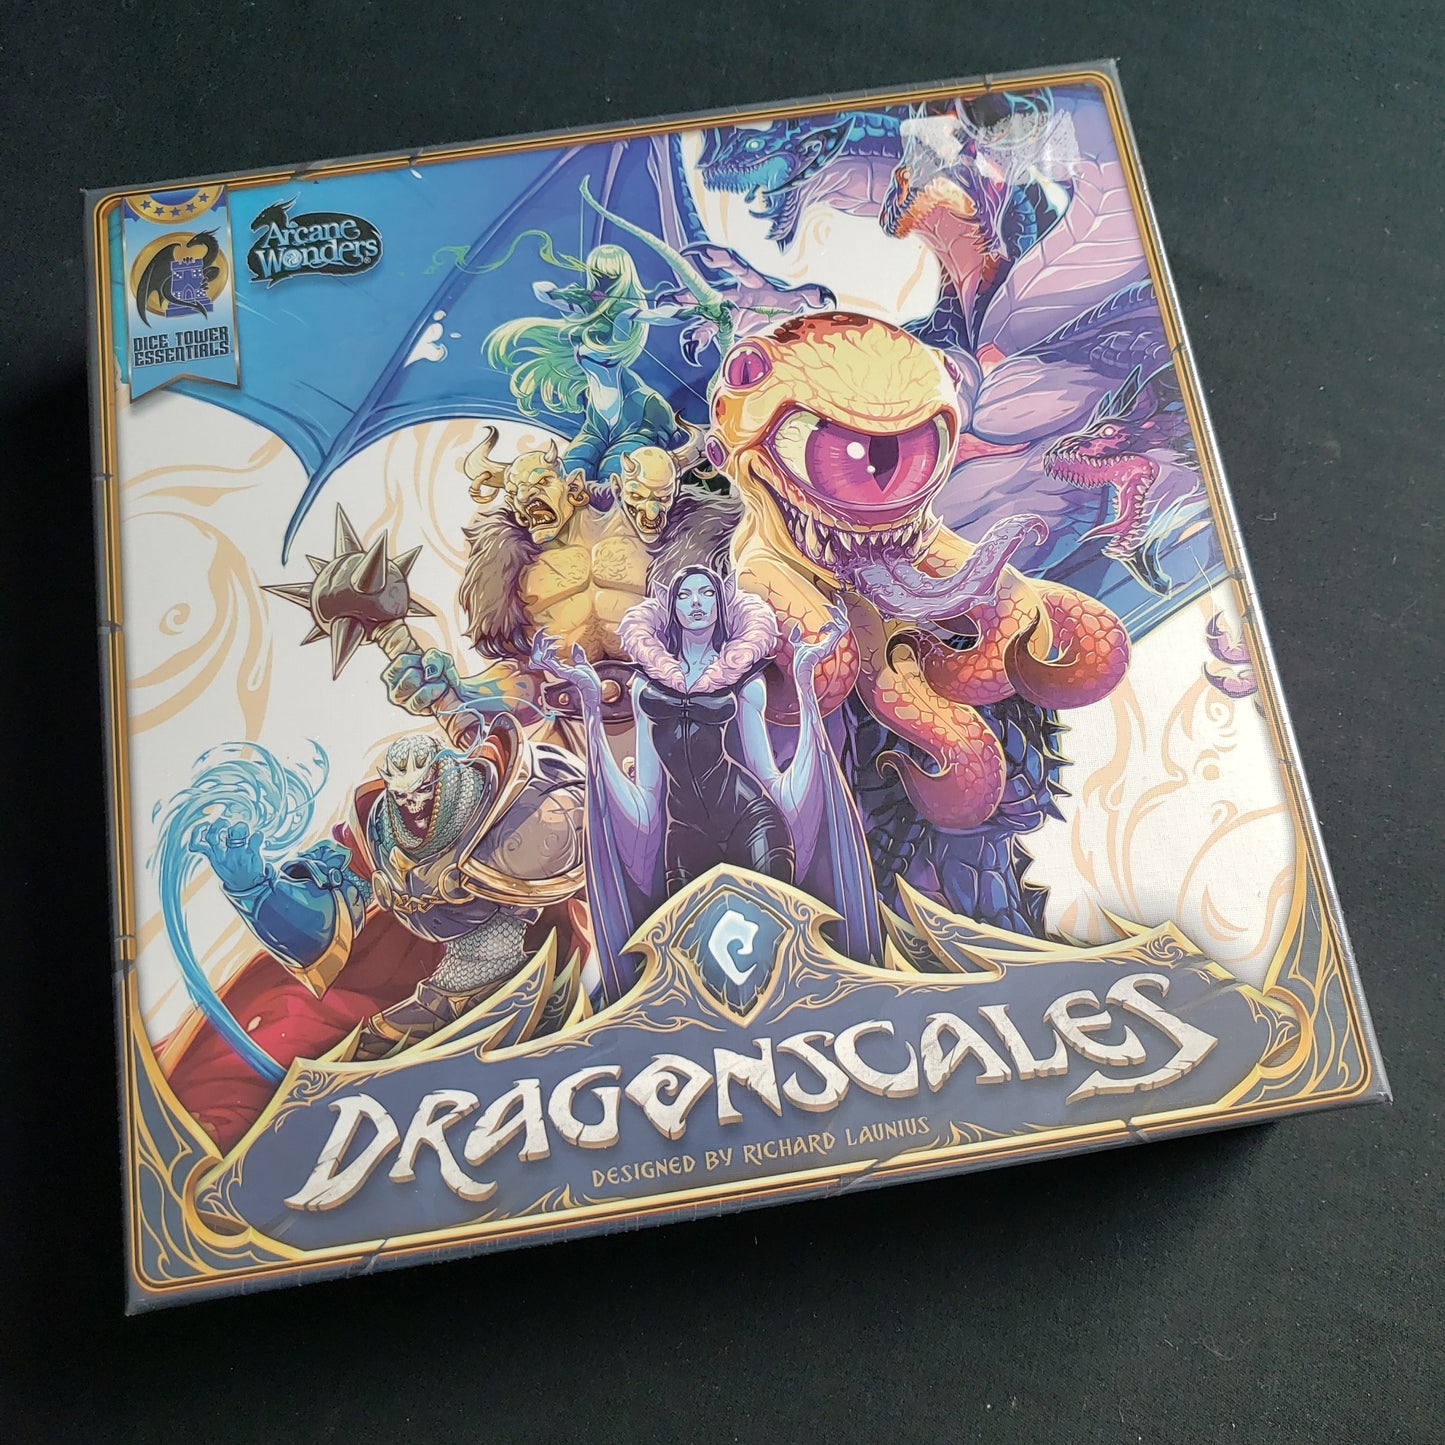 Image shows the front cover of the box of the Dragonscales board game